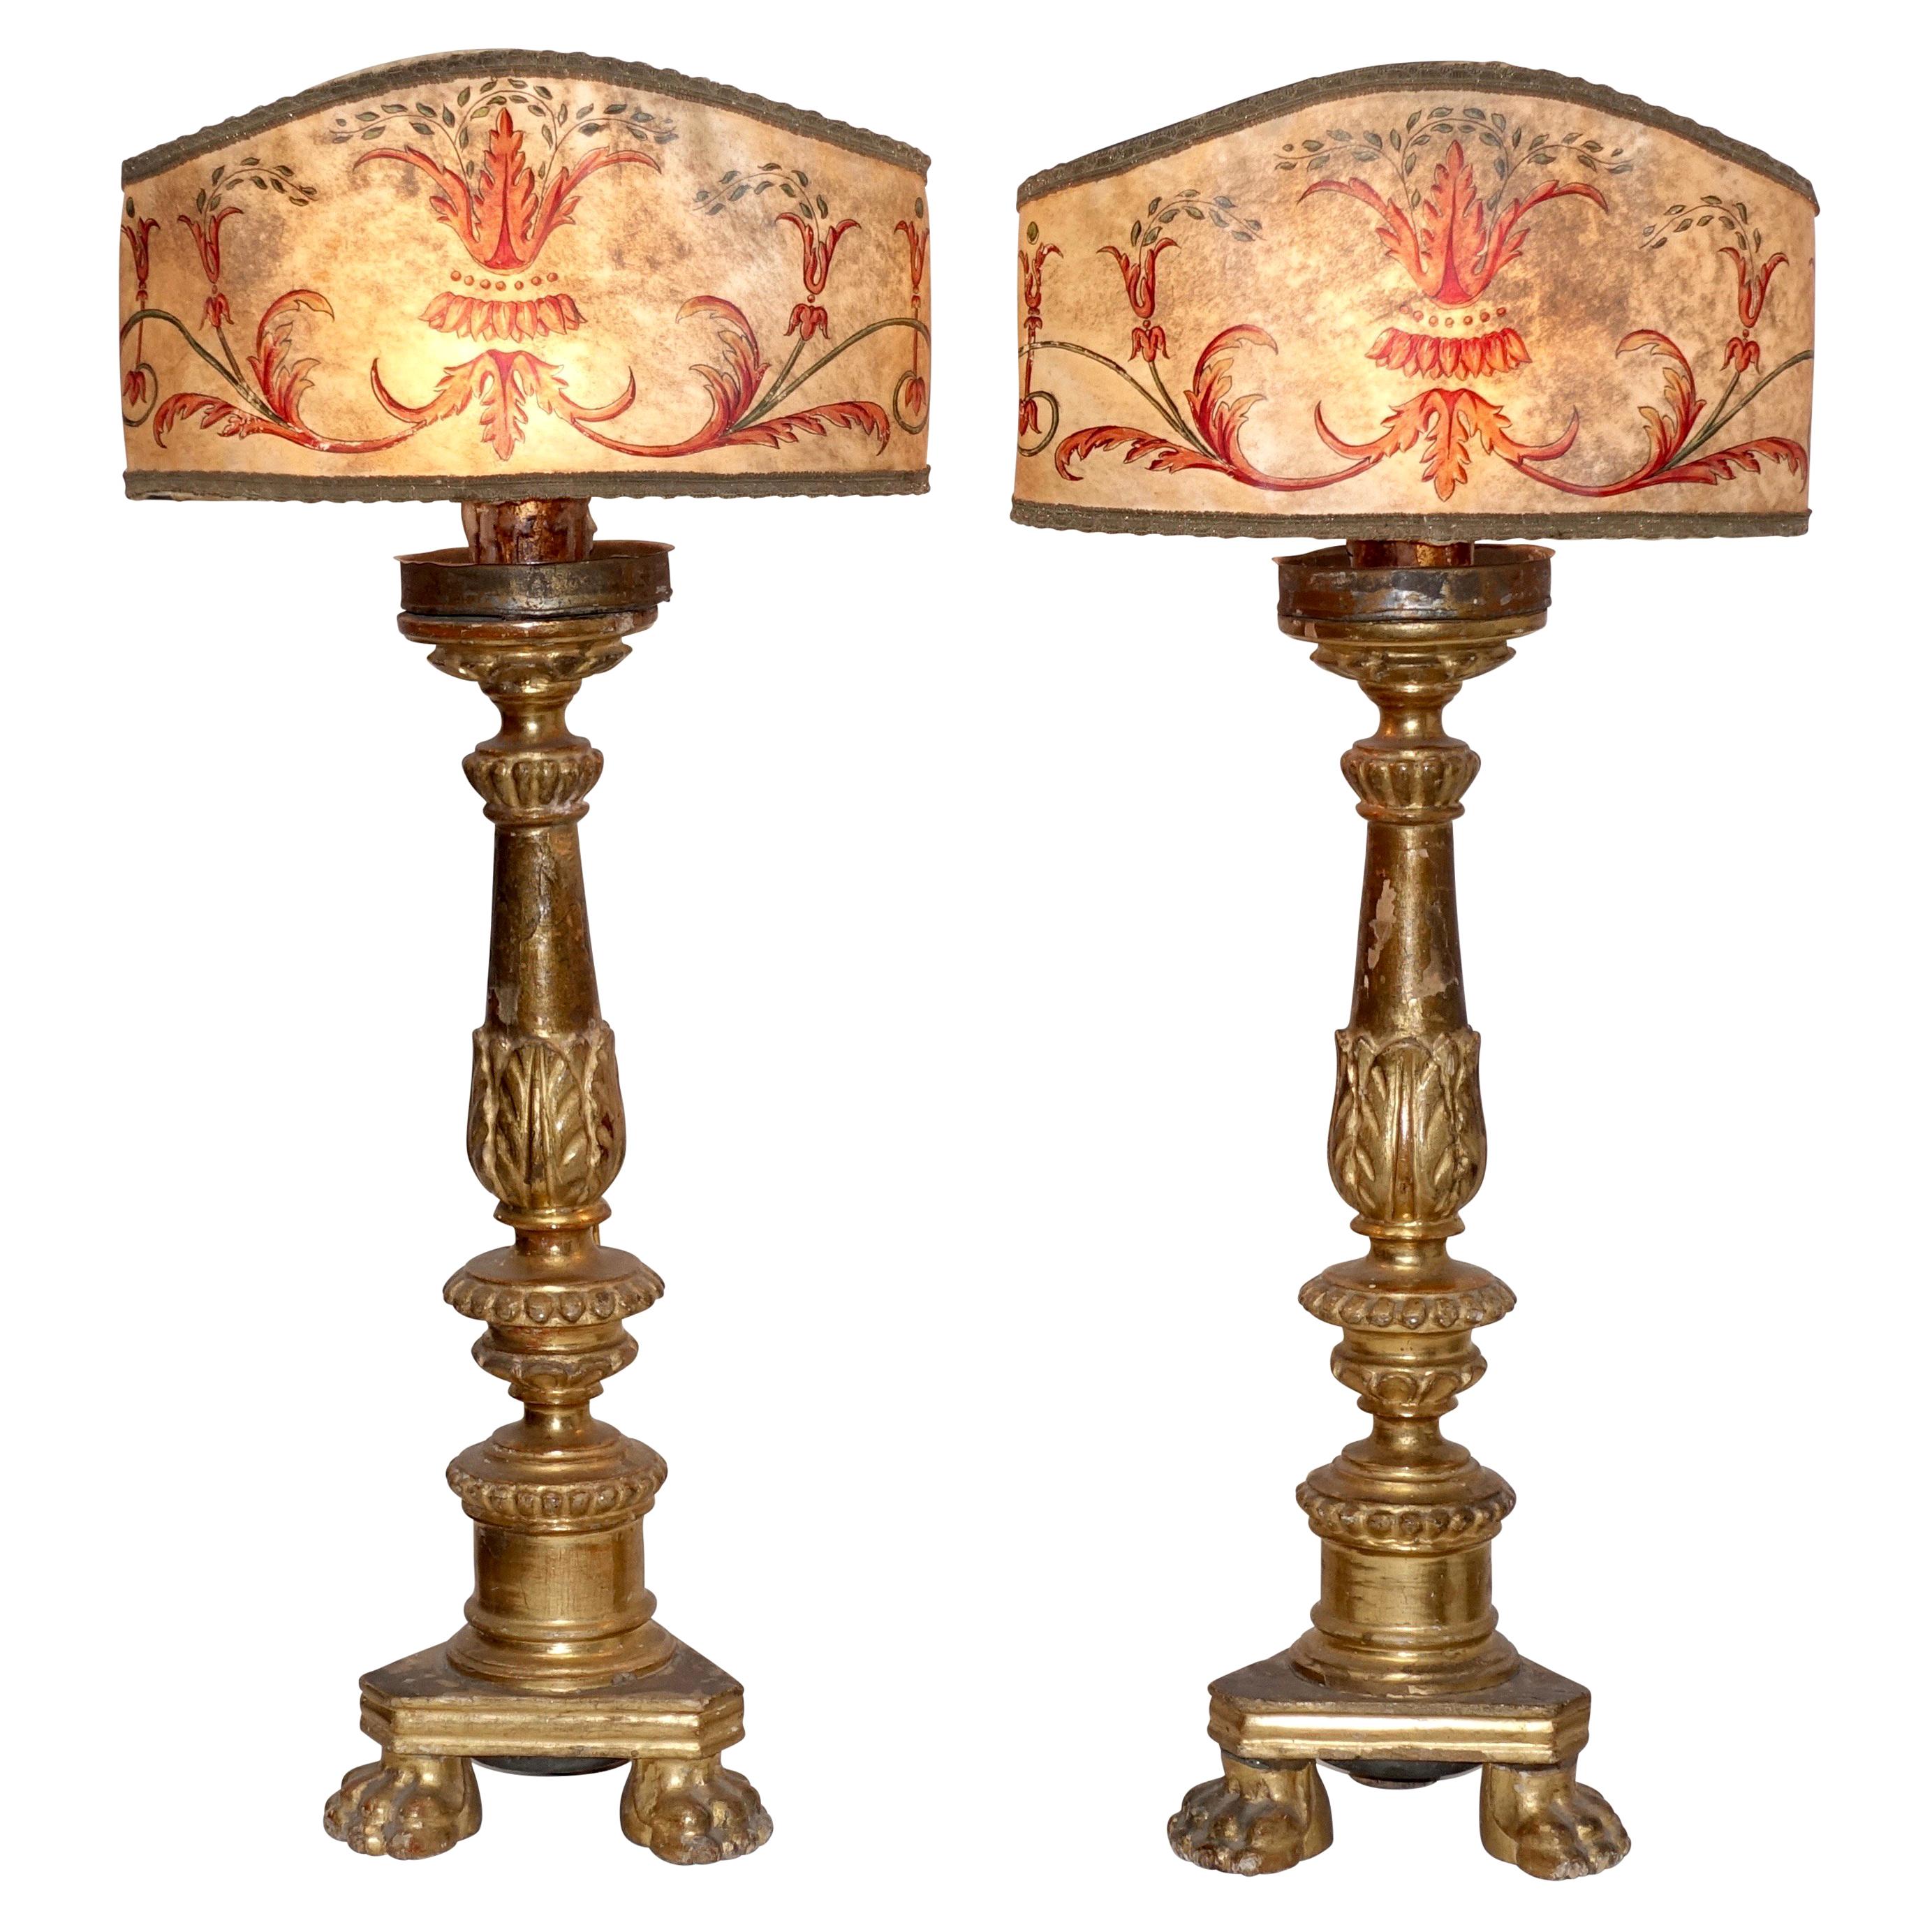 Pair of Gilt Candlestick Lamps with Parchment Shades, Italian, 18th Century